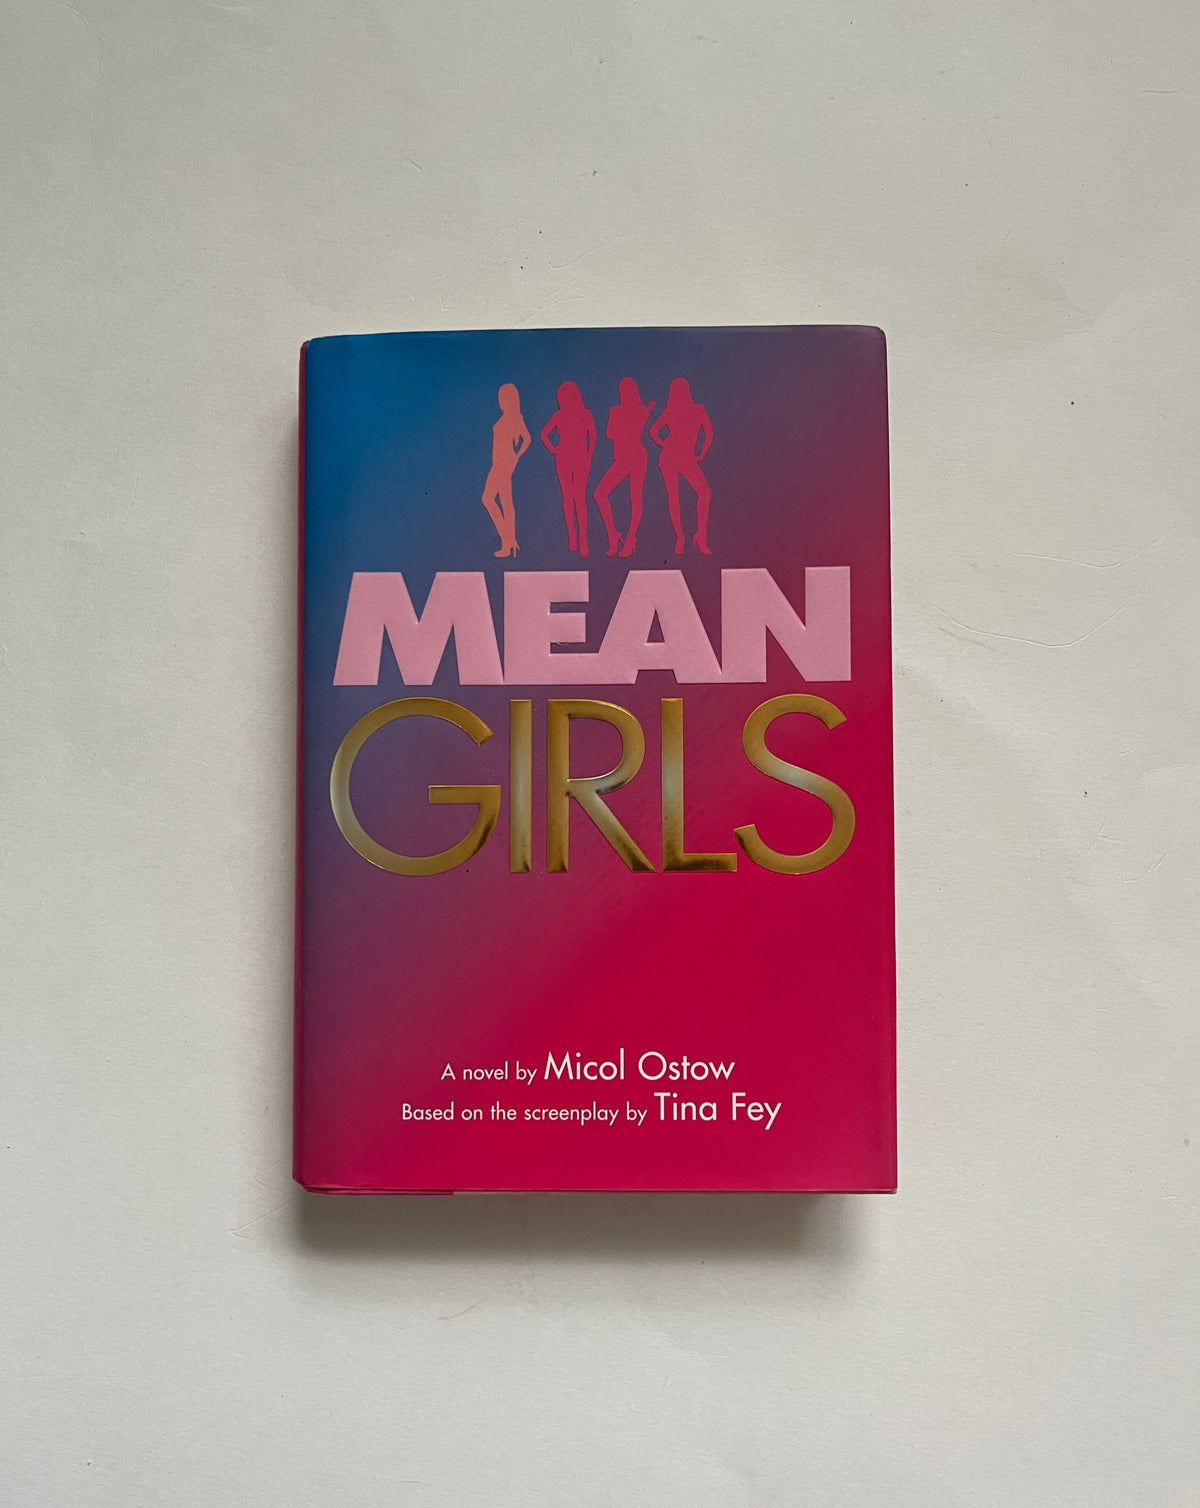 Mean Girls by Micol Ostow based on a the screenplay by Tina Fey